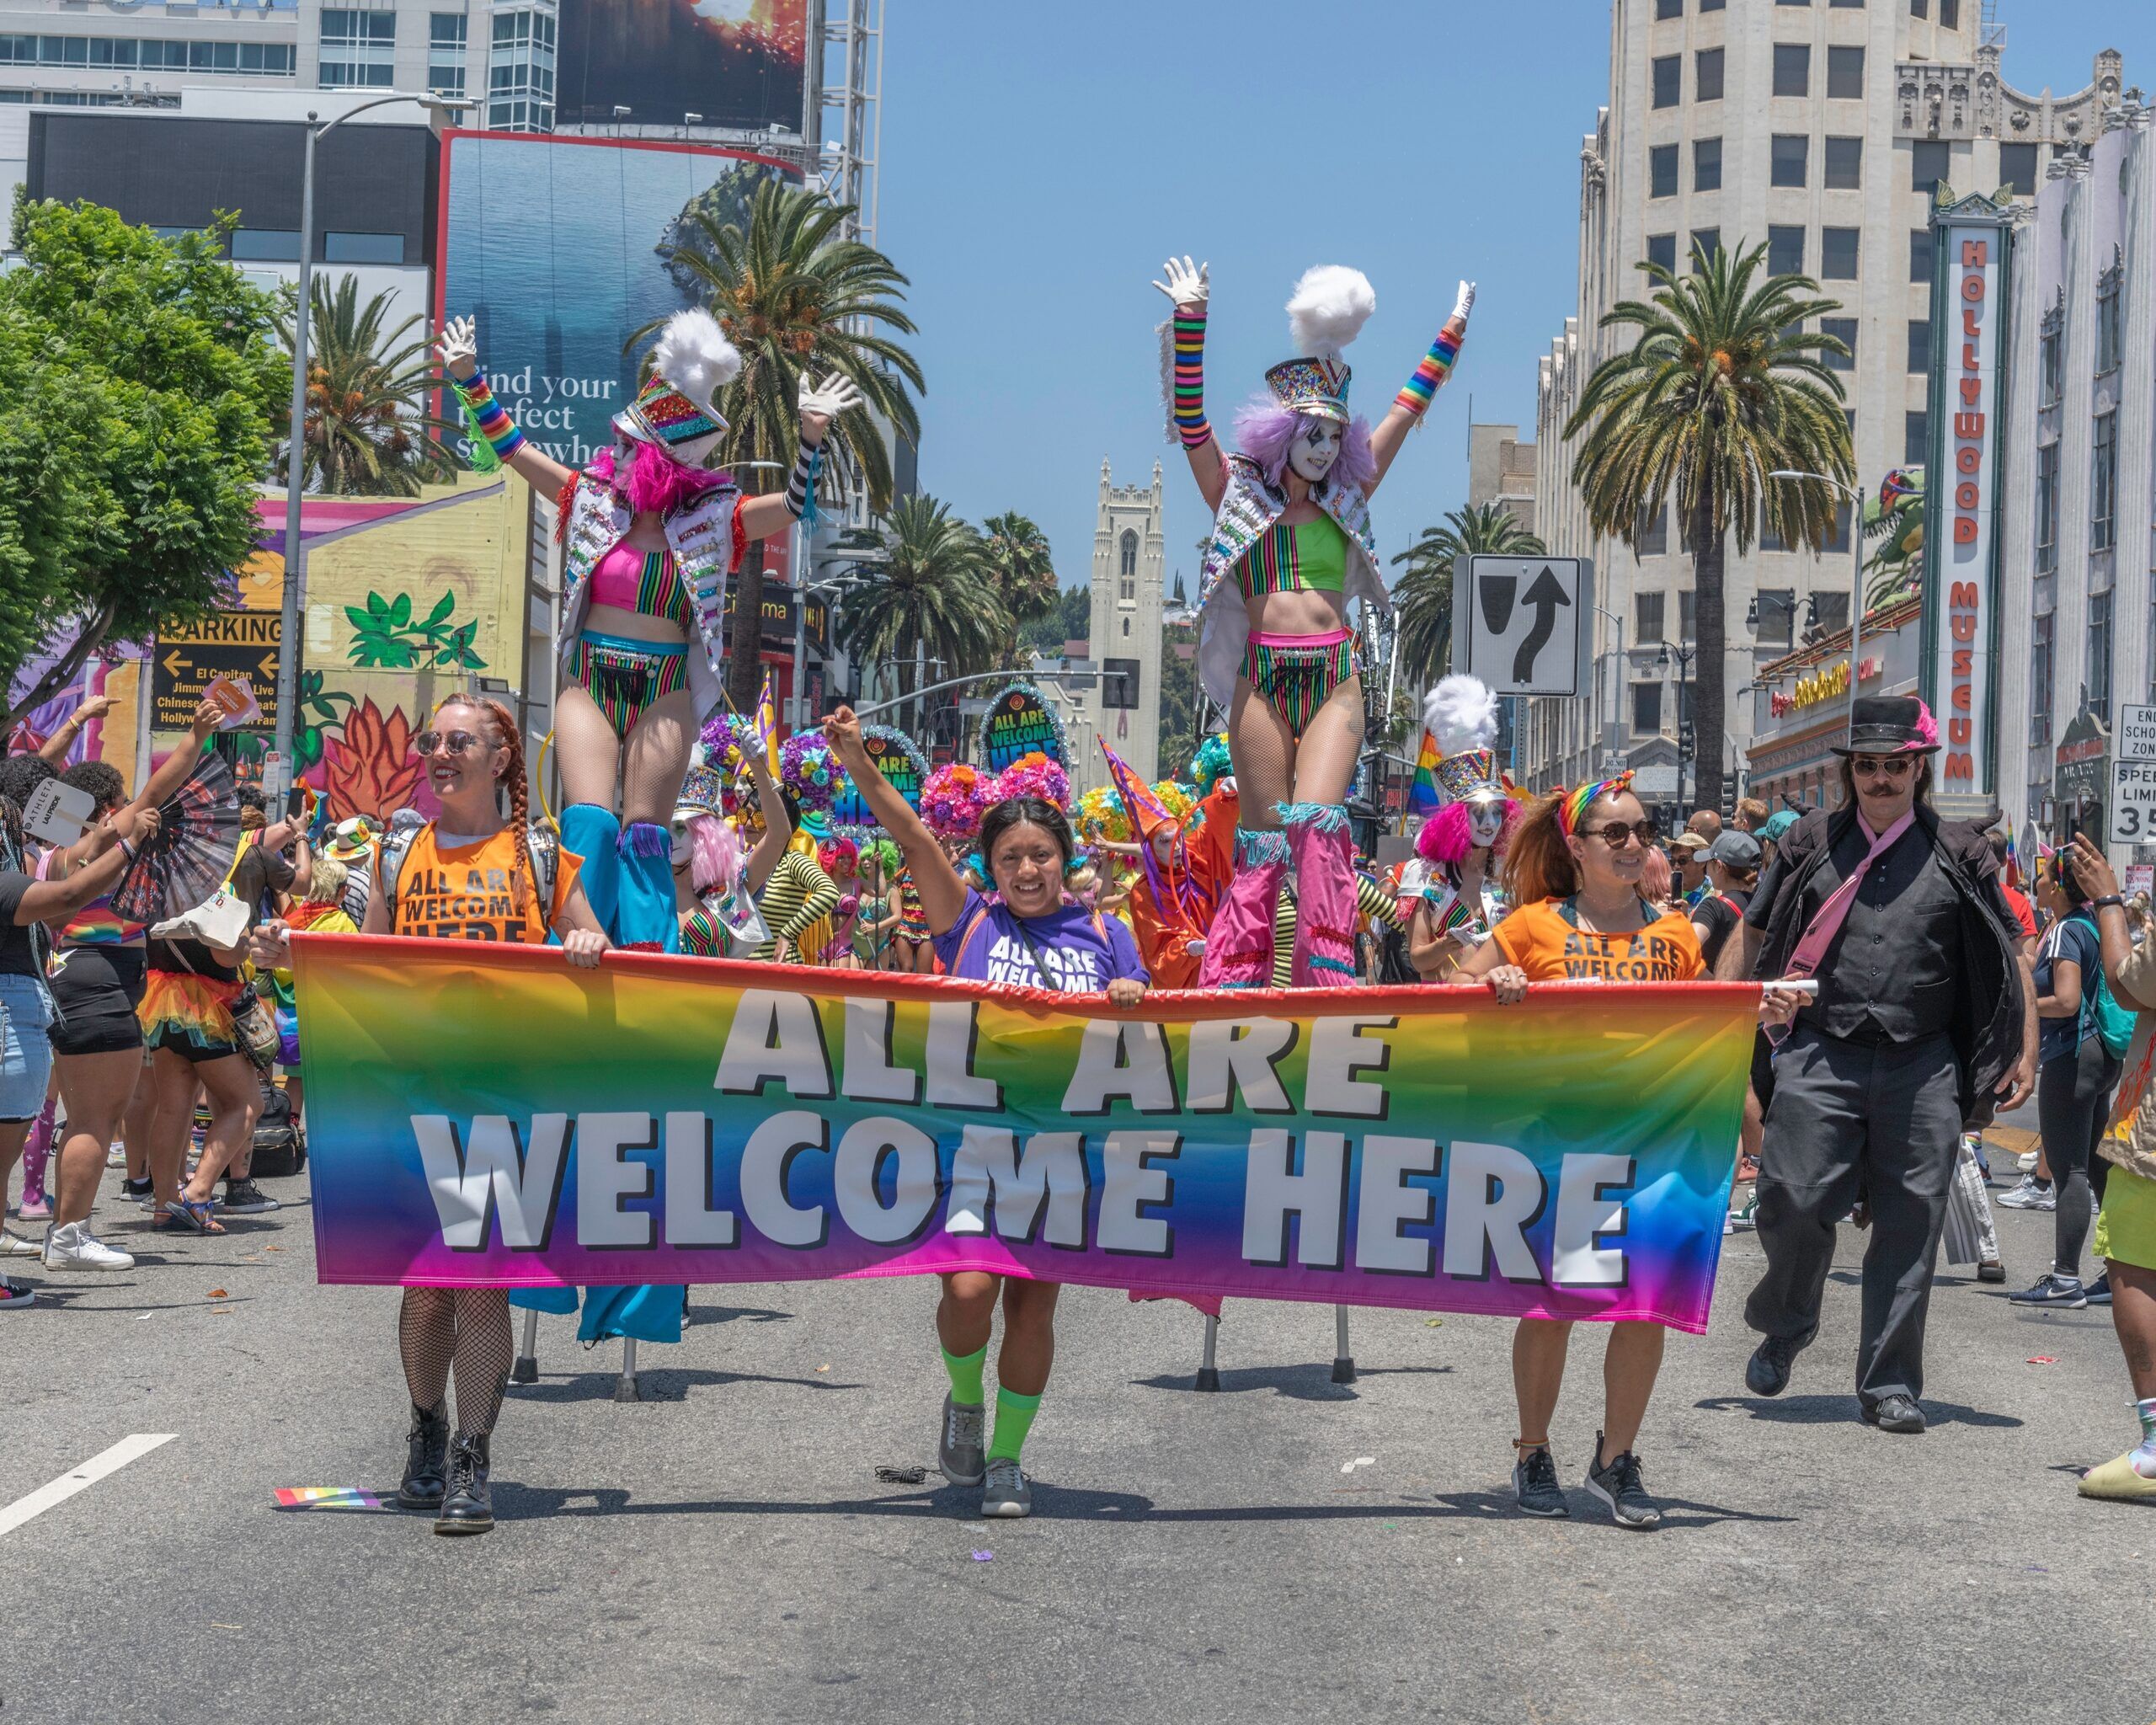 a colorful group of people march in the Los Angeles Pride Parade holding a sign that says "All are welcome here"